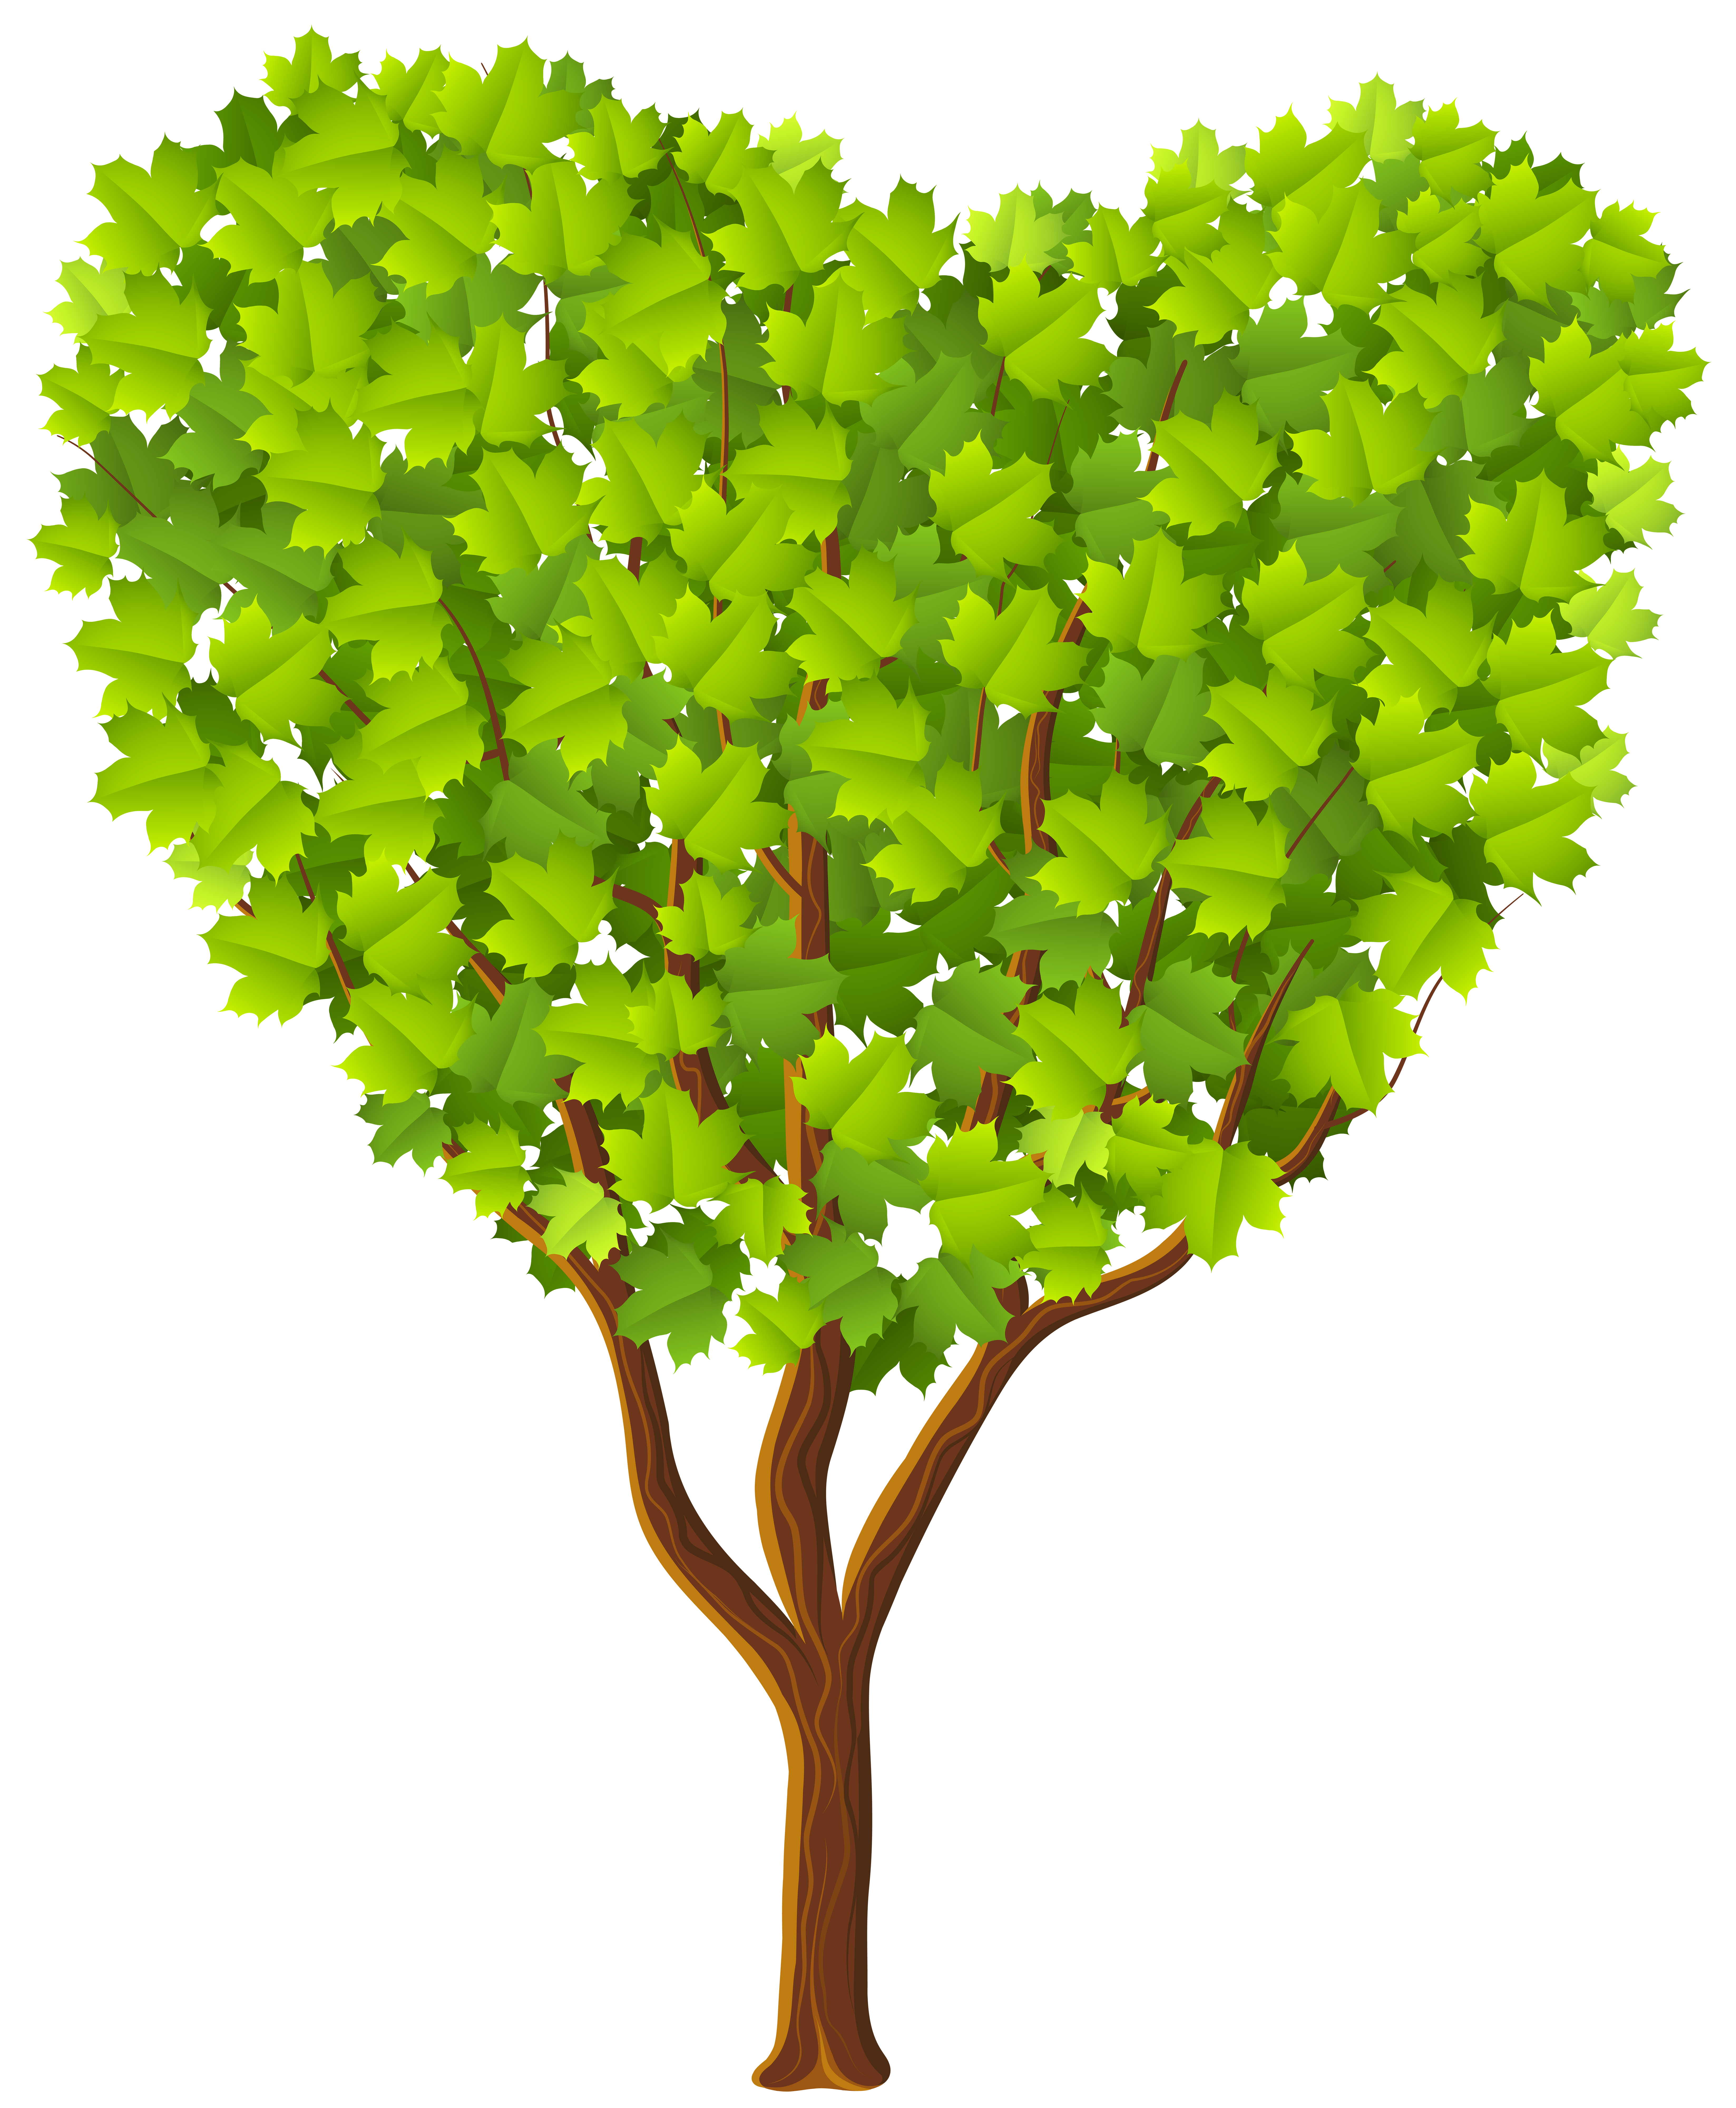 Green Heart Tree Transparent PNG Image | Gallery ...